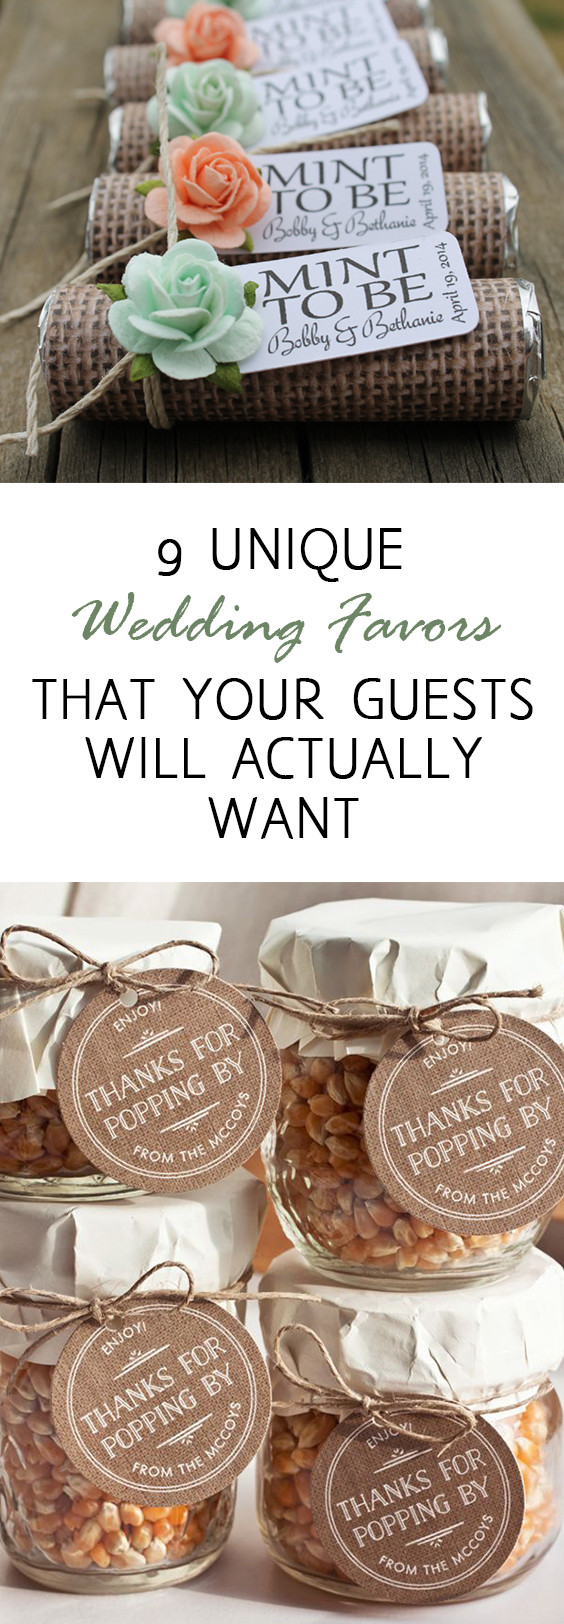 Inexpensive Wedding Favors DIY
 9 Unique Wedding Favors that Your Guests Will Actually